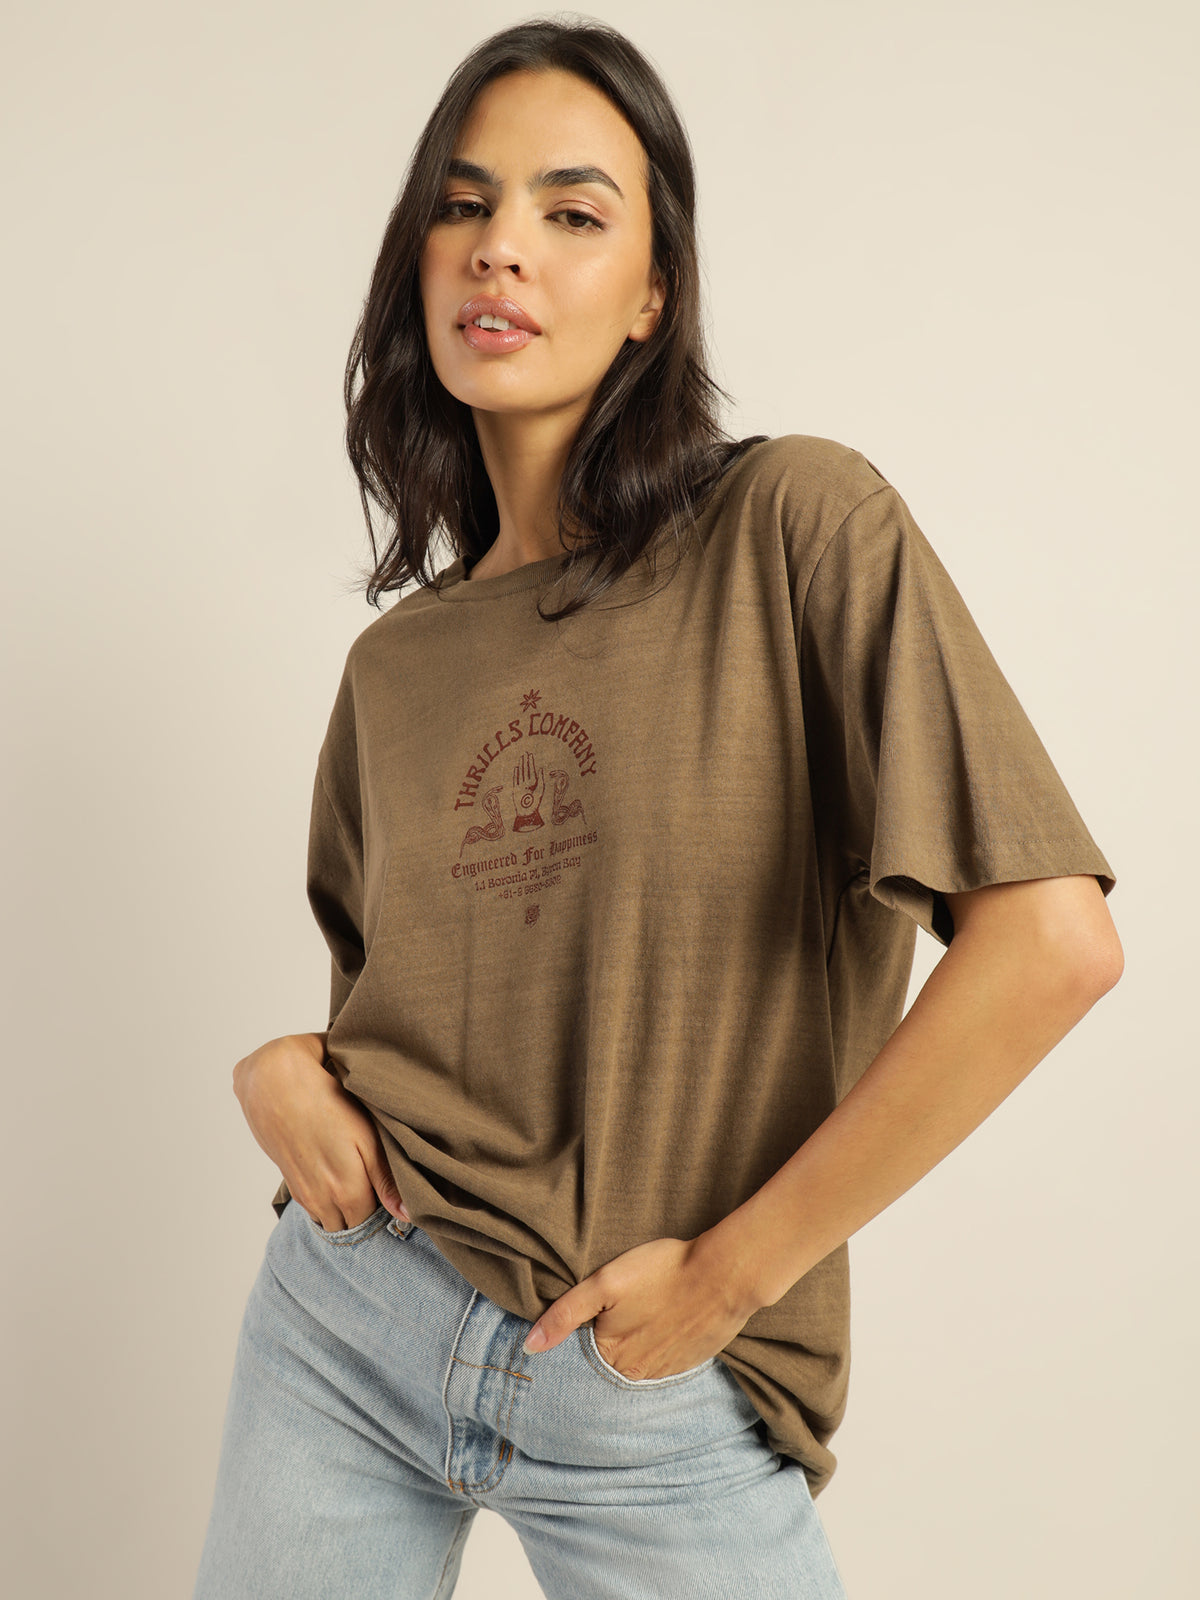 Engineered For Happiness Merch Fit T-Shirt in Desert